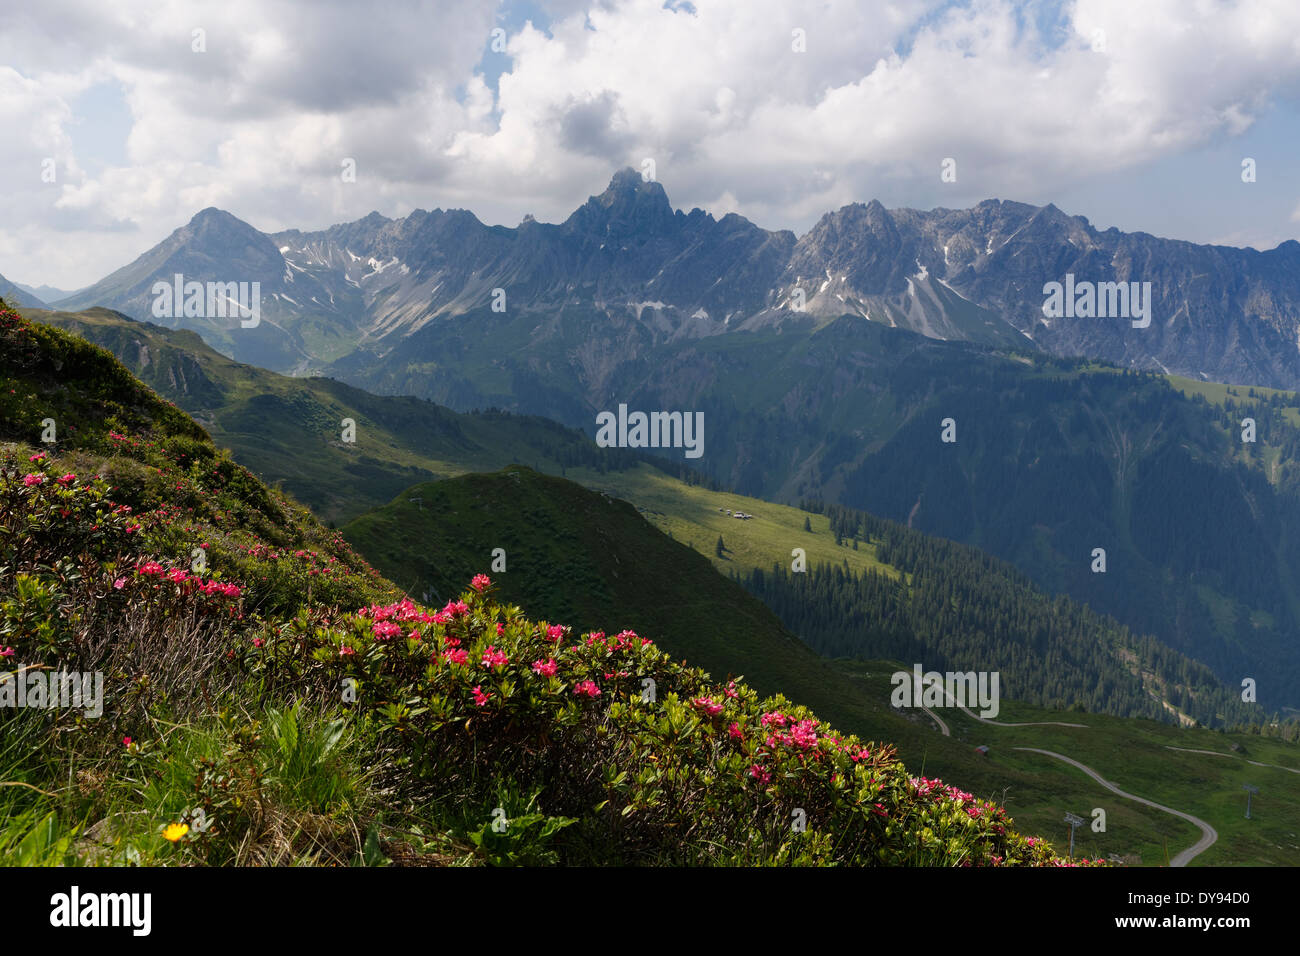 Austria, Vorarlberg, Montafon, Raetikon, View from Golm to Mountain Zimba with Vandanser Stone Wall, in the foreground rusty-leaved alpenrose (Rhododendron ferrugineum) Stock Photo